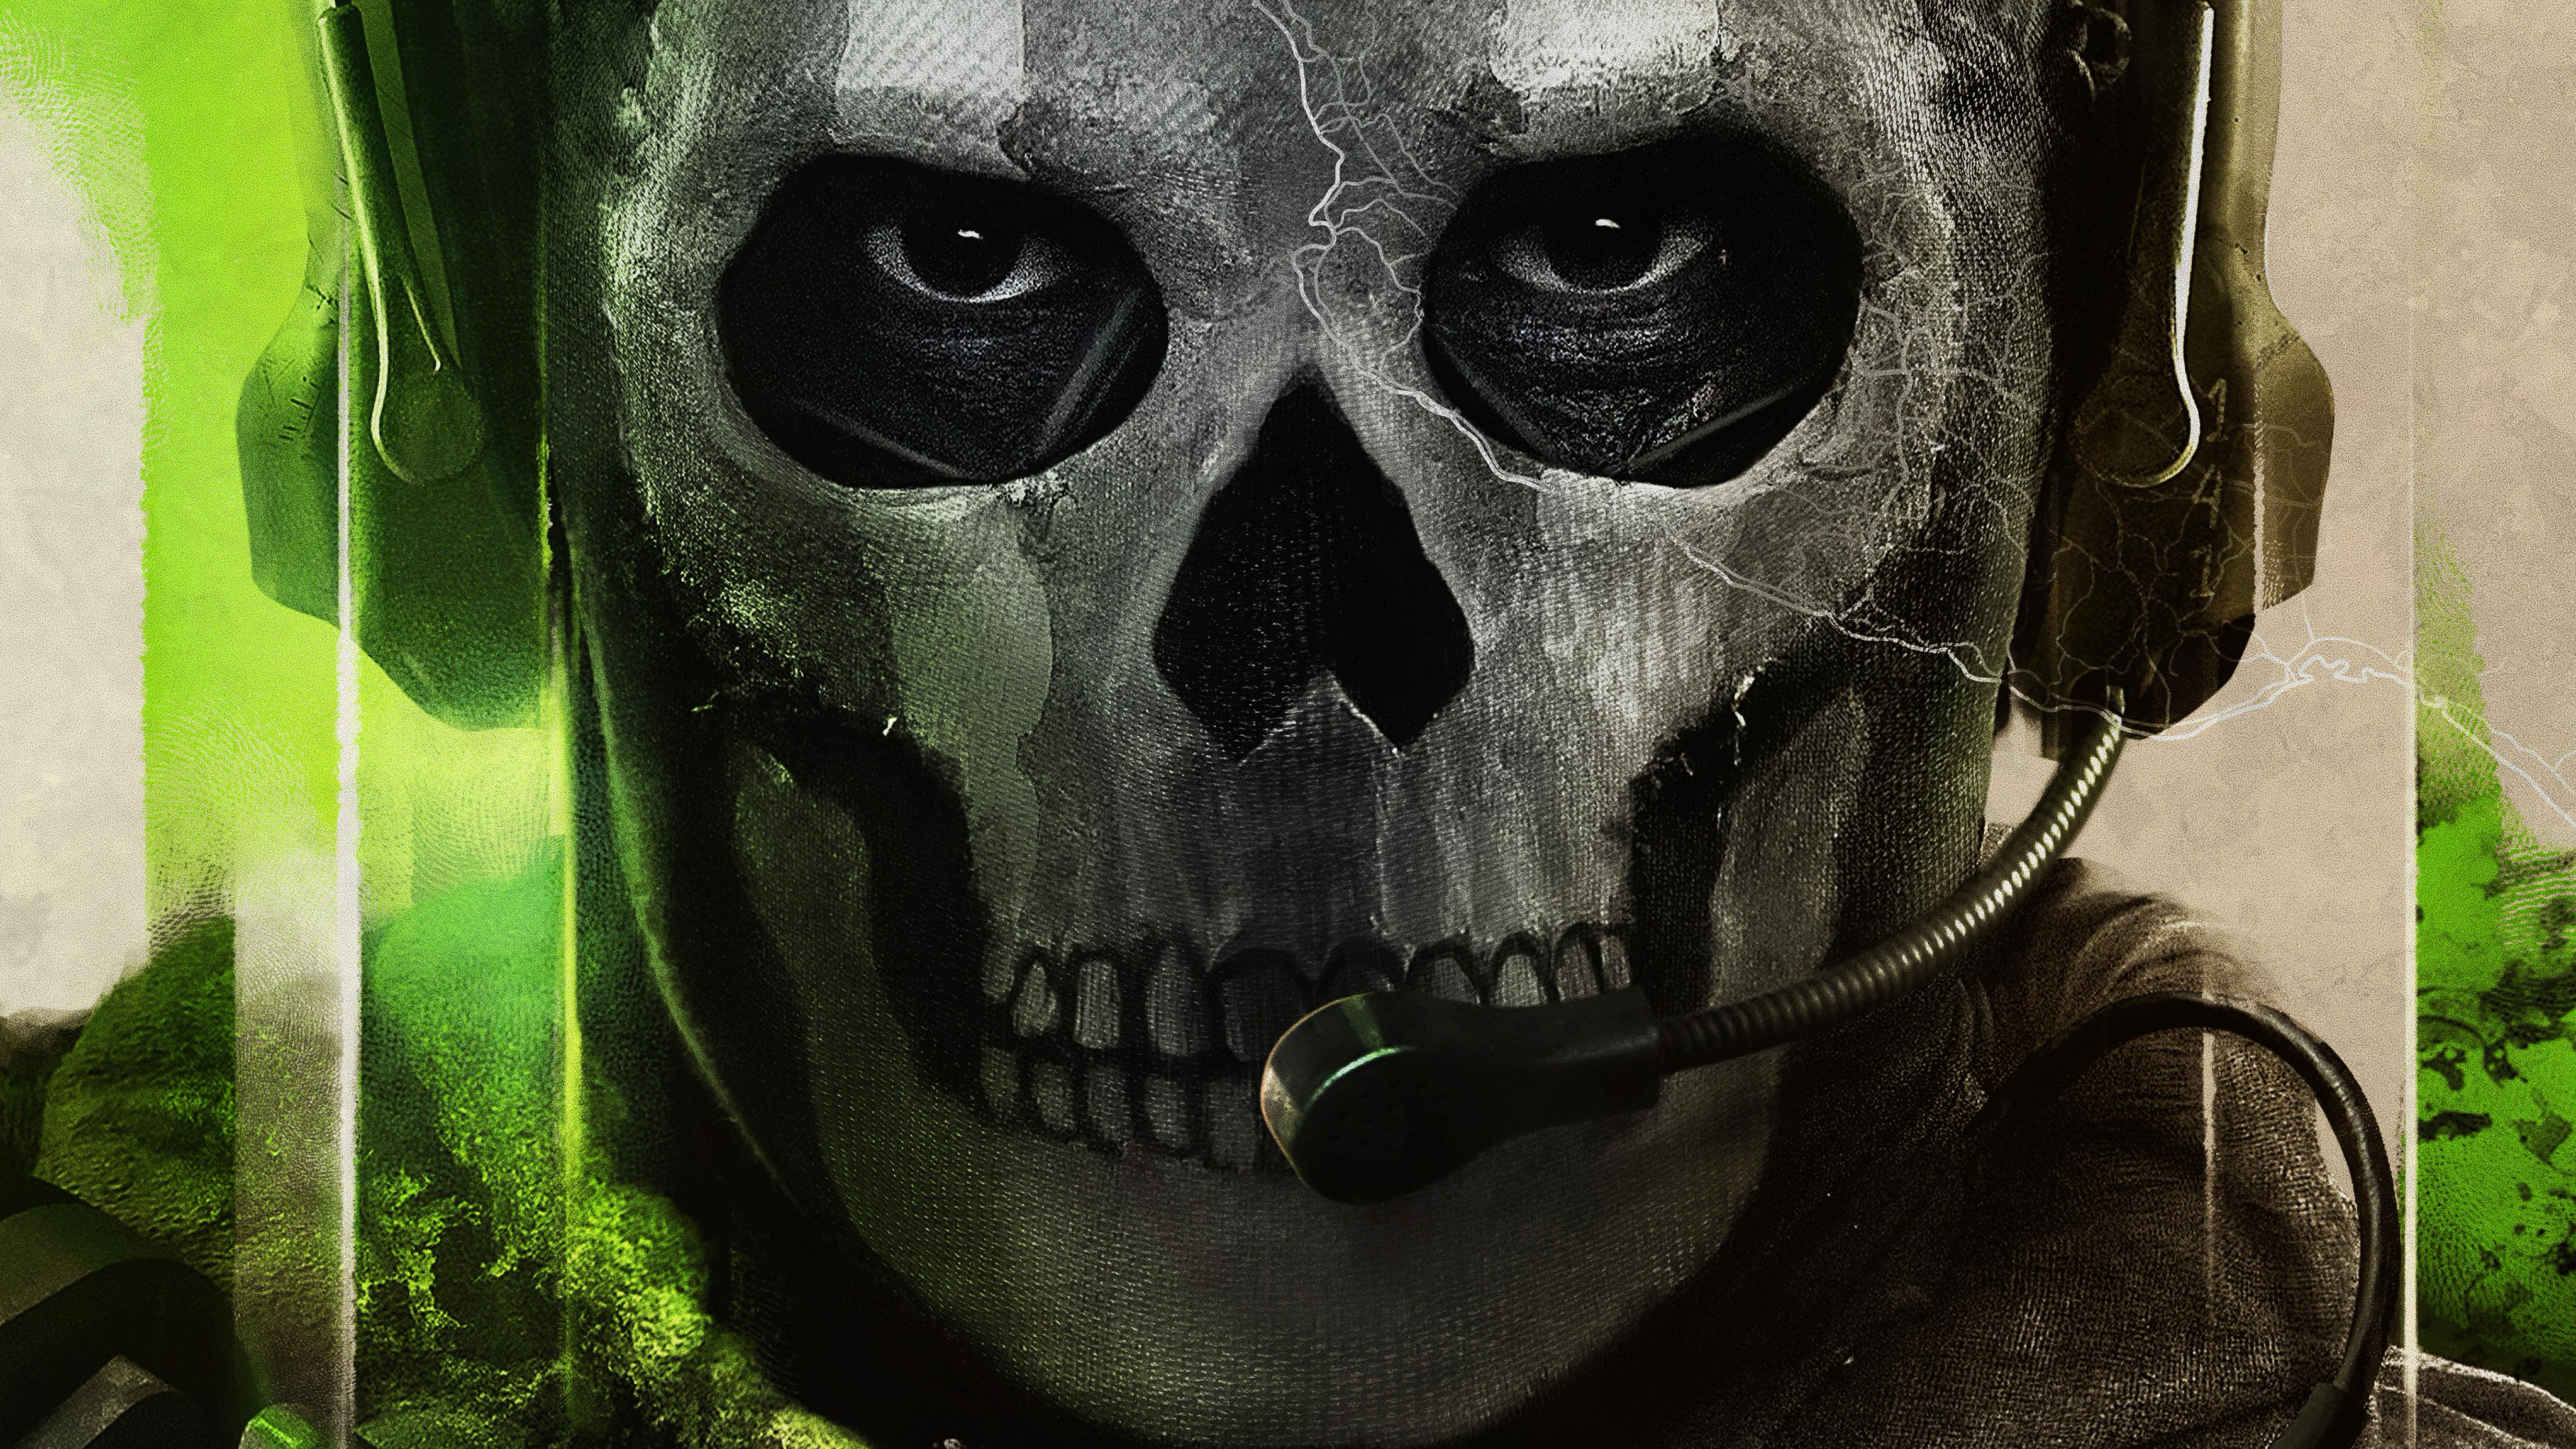 Call of Duty: Ghosts Video game Drawing, Call of Duty, logo, call Of Duty,  desktop Wallpaper png